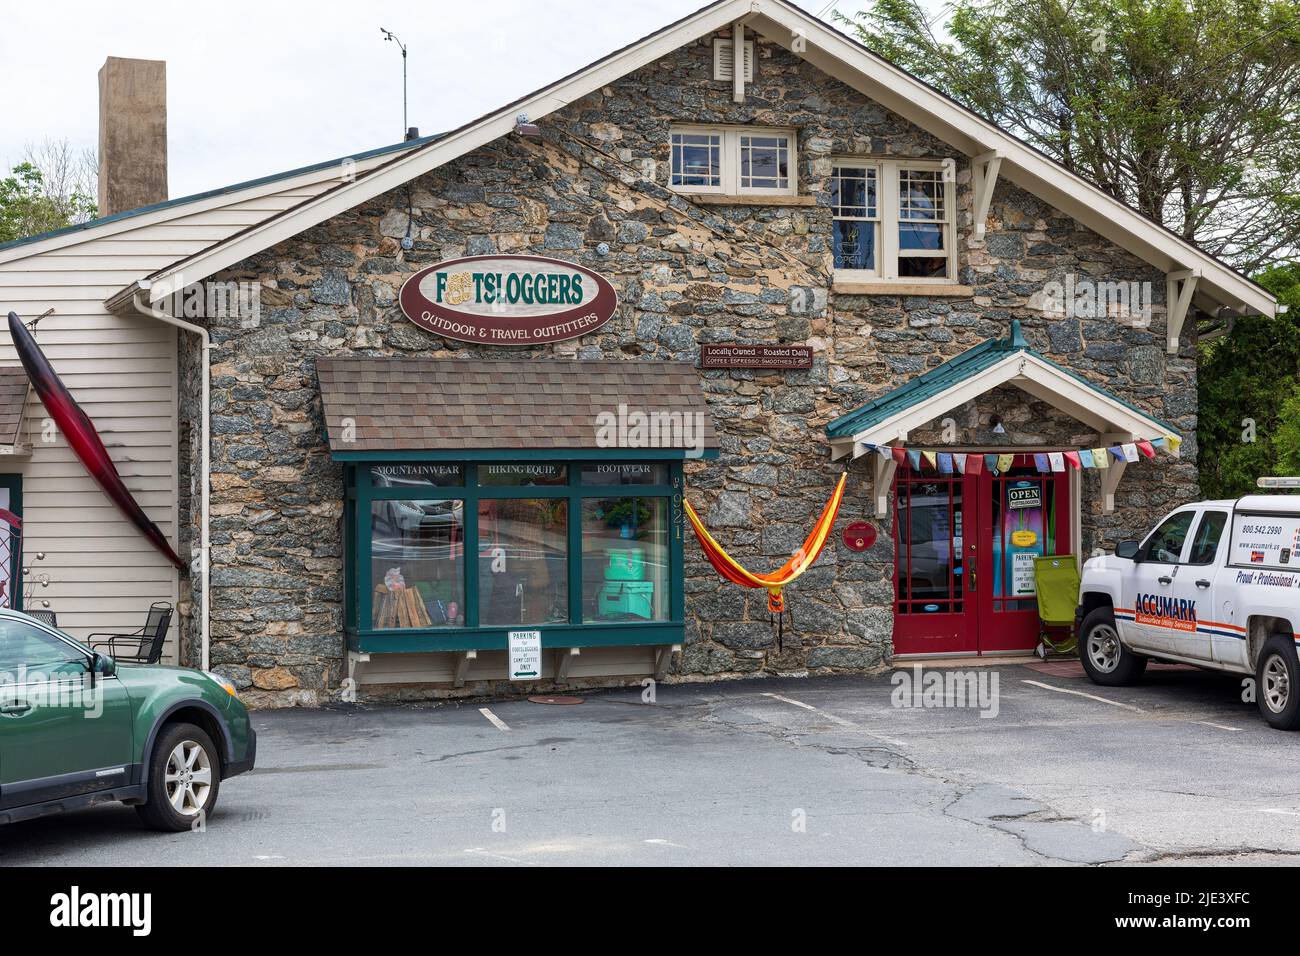 BLOWING ROCK, NC, USA-20 JUNE 2022: Footsloggers OUtdoor and Travel Outfitters, building and sign. Stock Photo